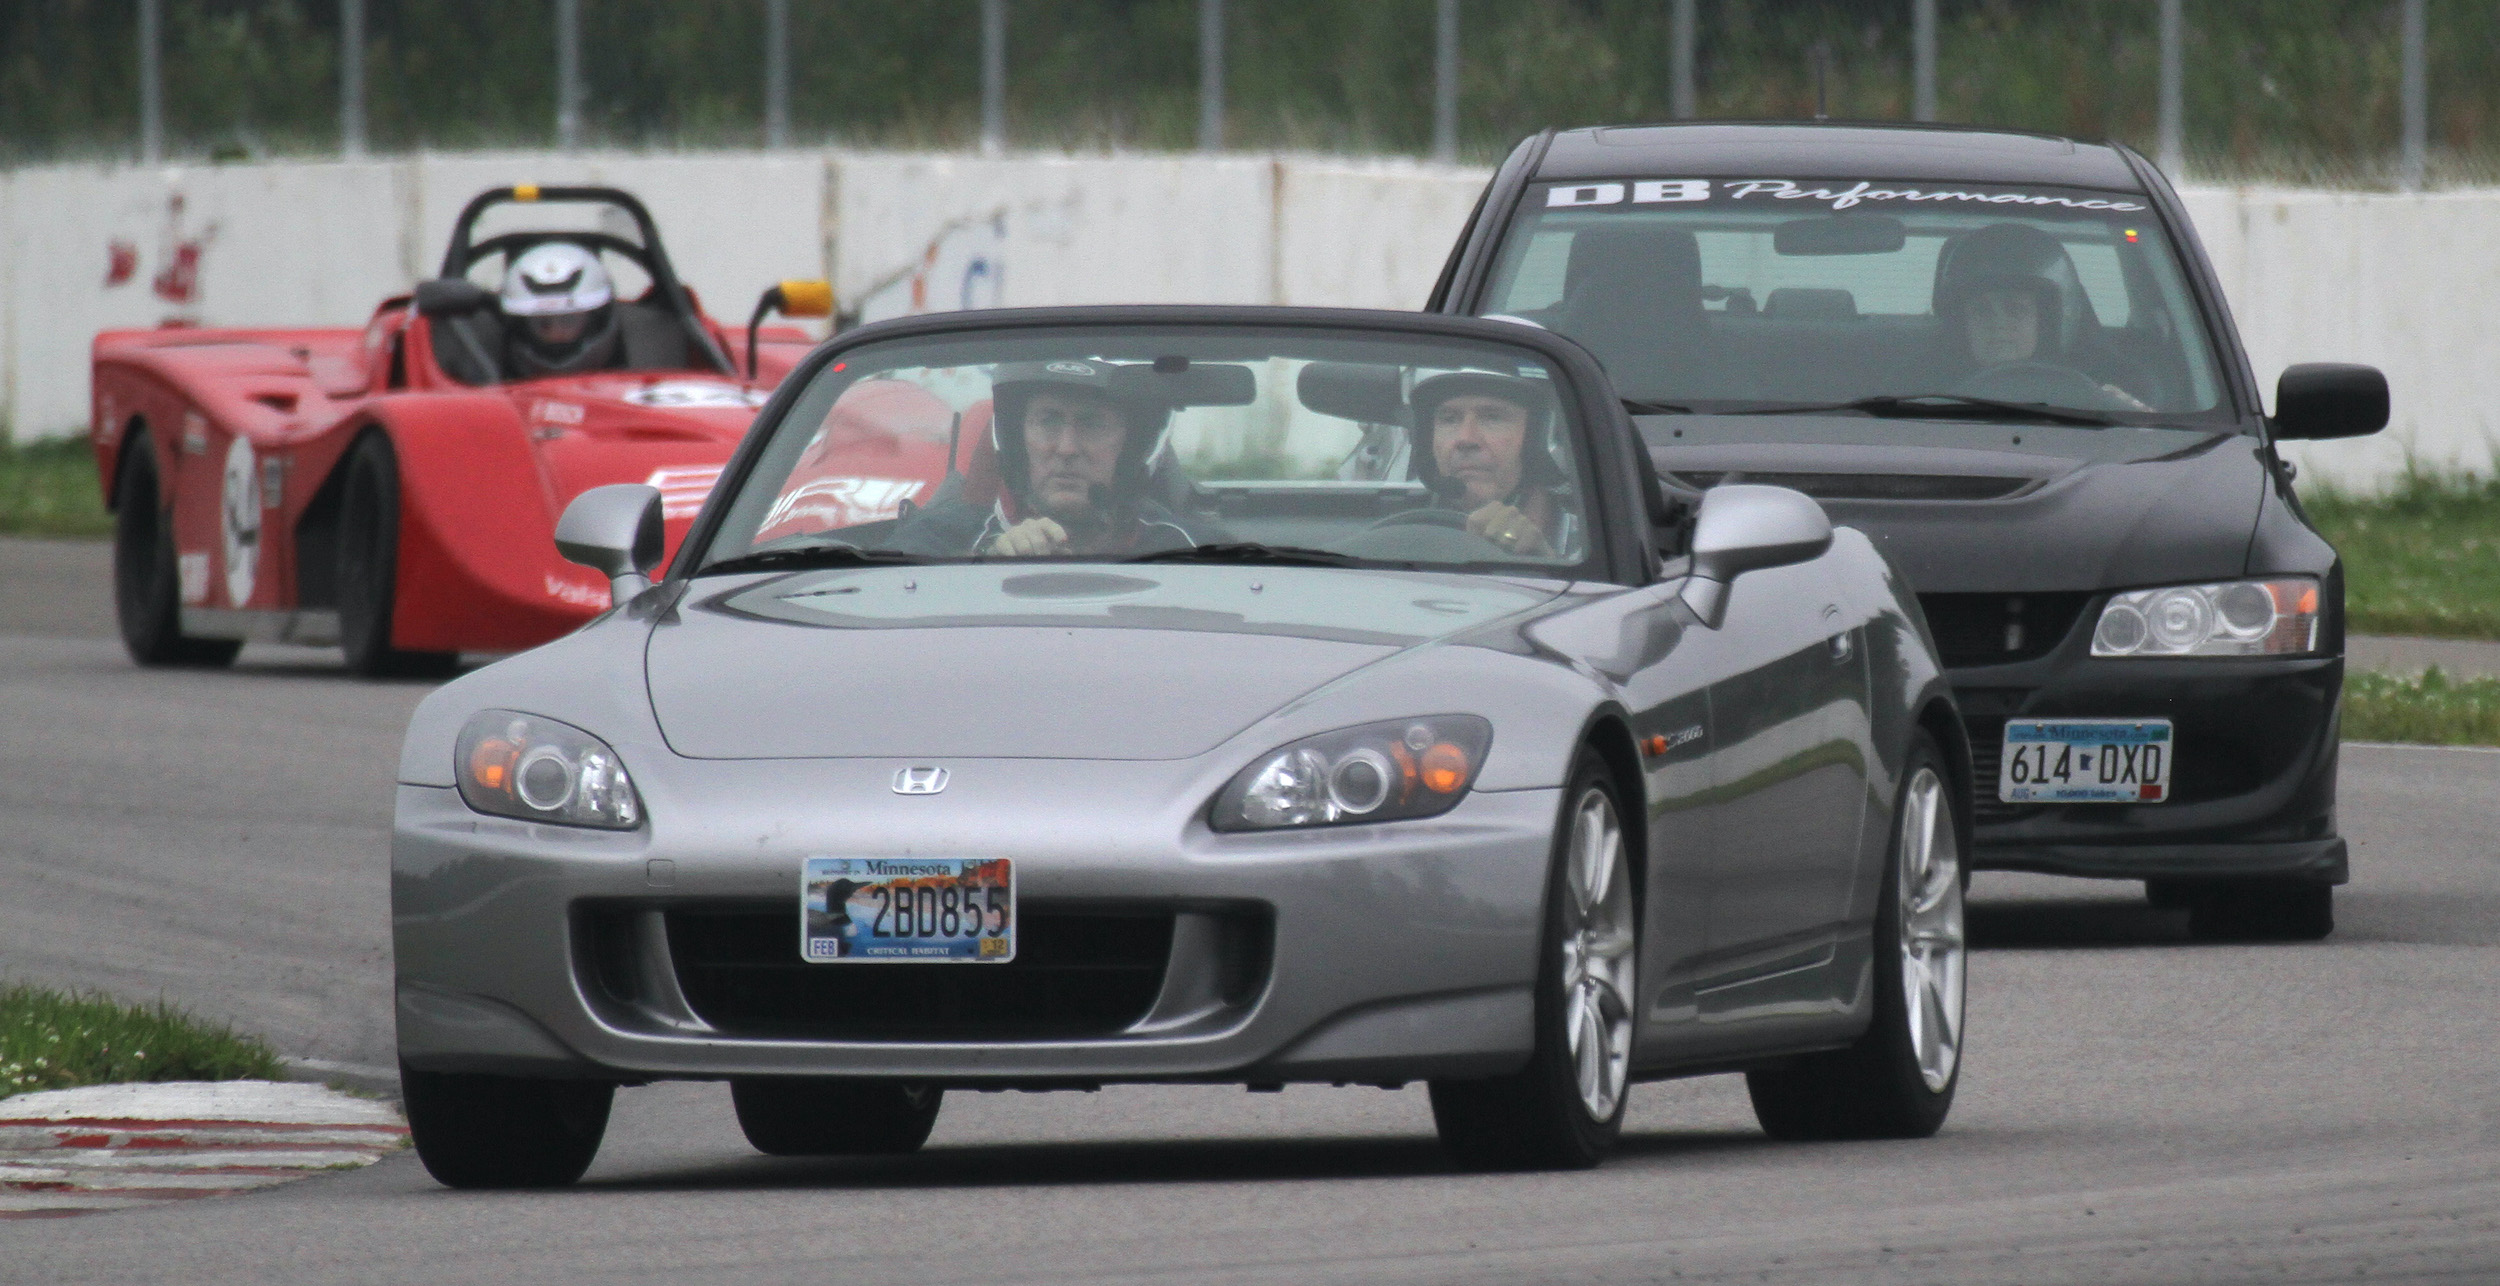 A honda s2000 lapping a race track